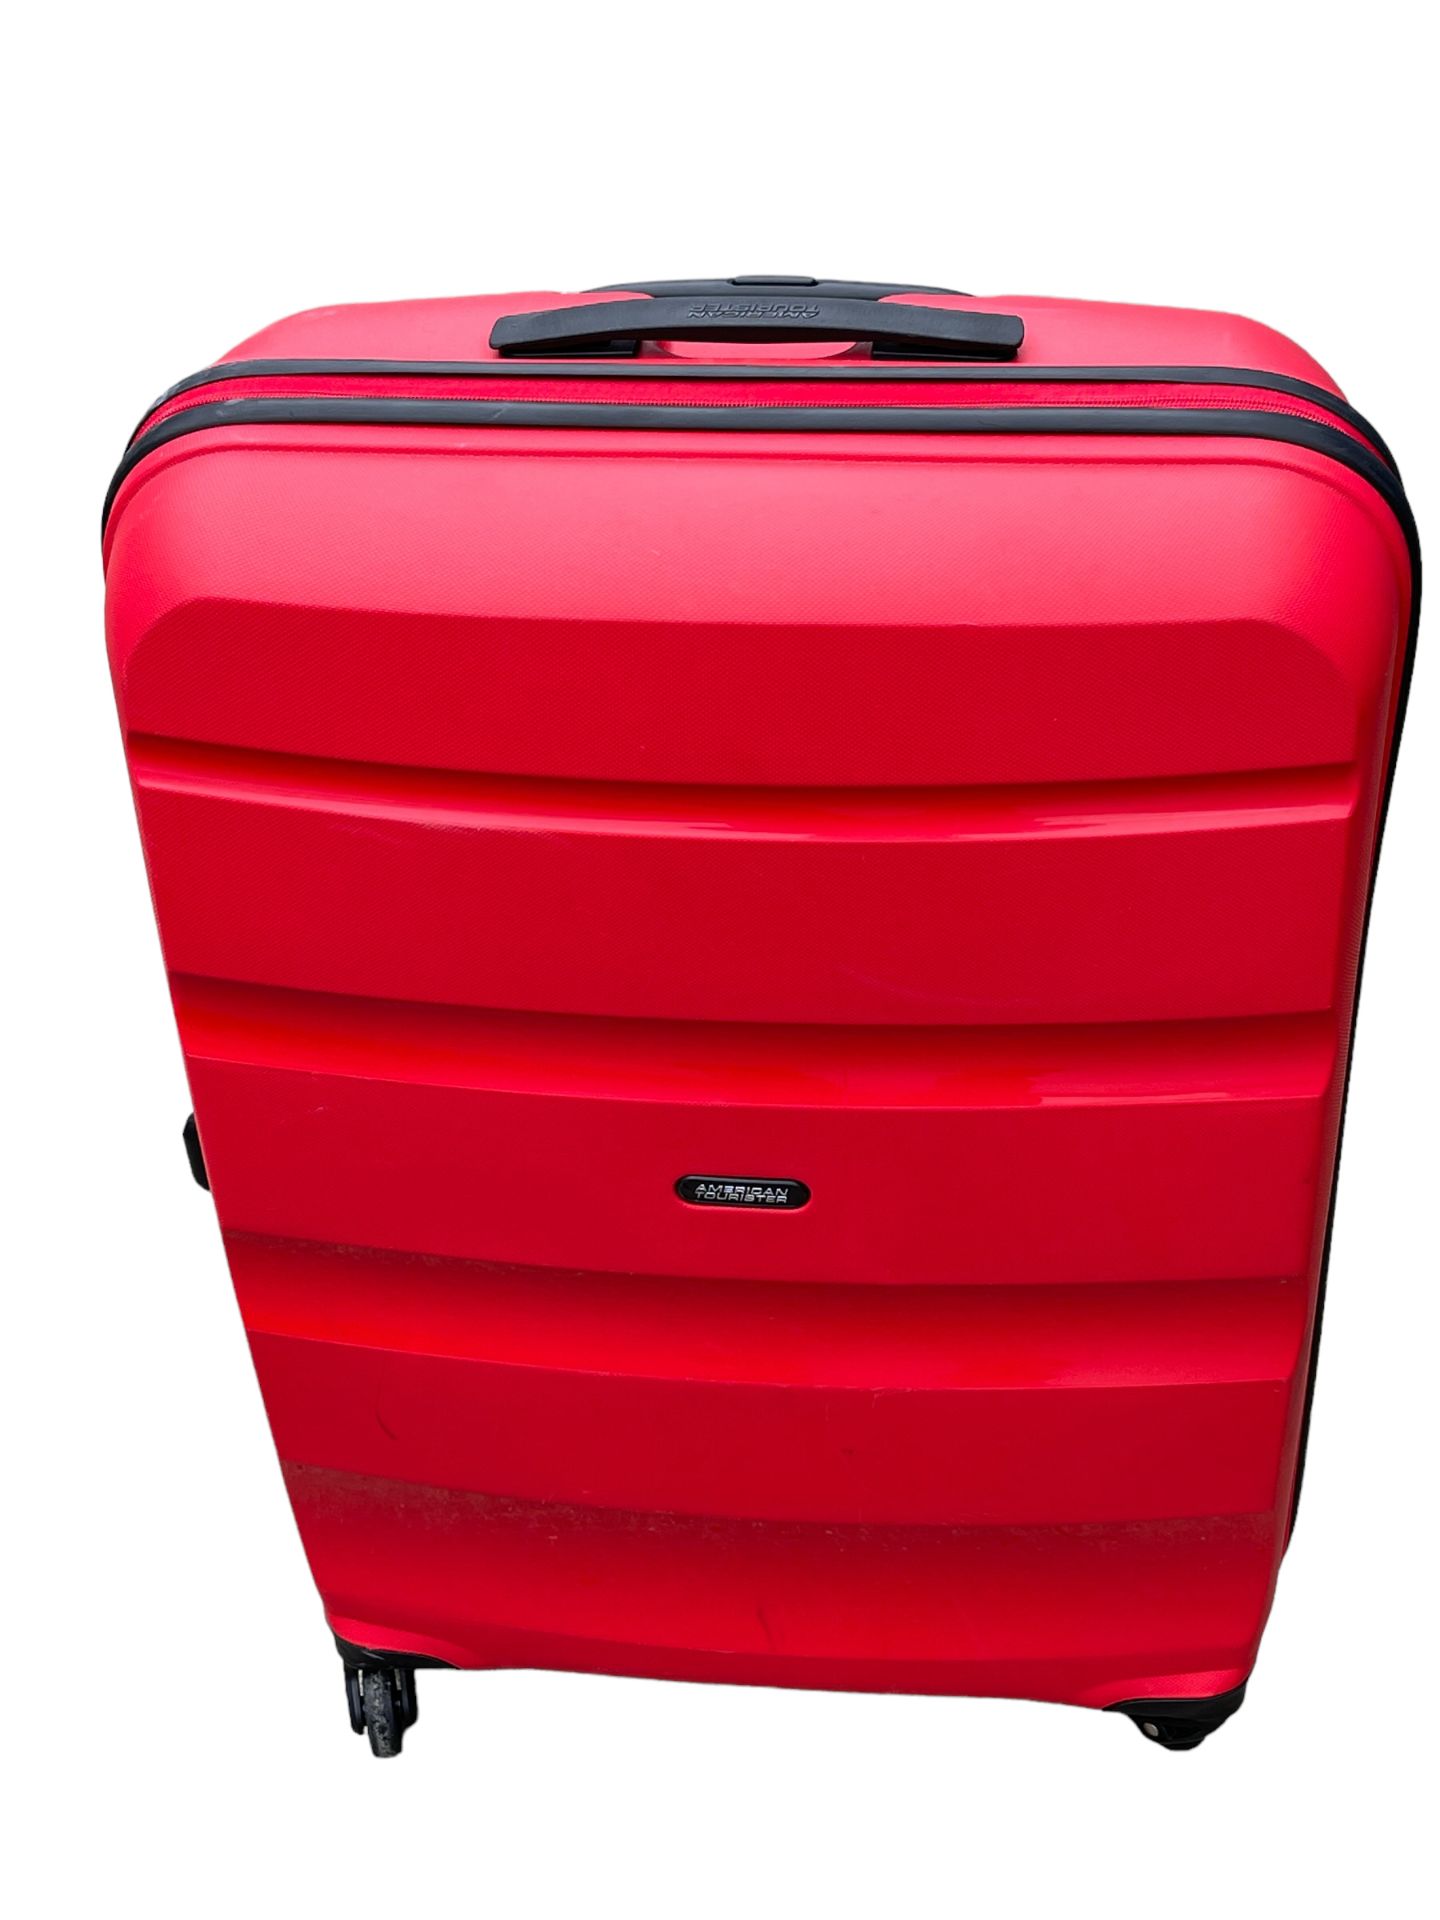 Large Suitcase, Unclaimed Luggage from our Private Jet Charter - Image 2 of 2